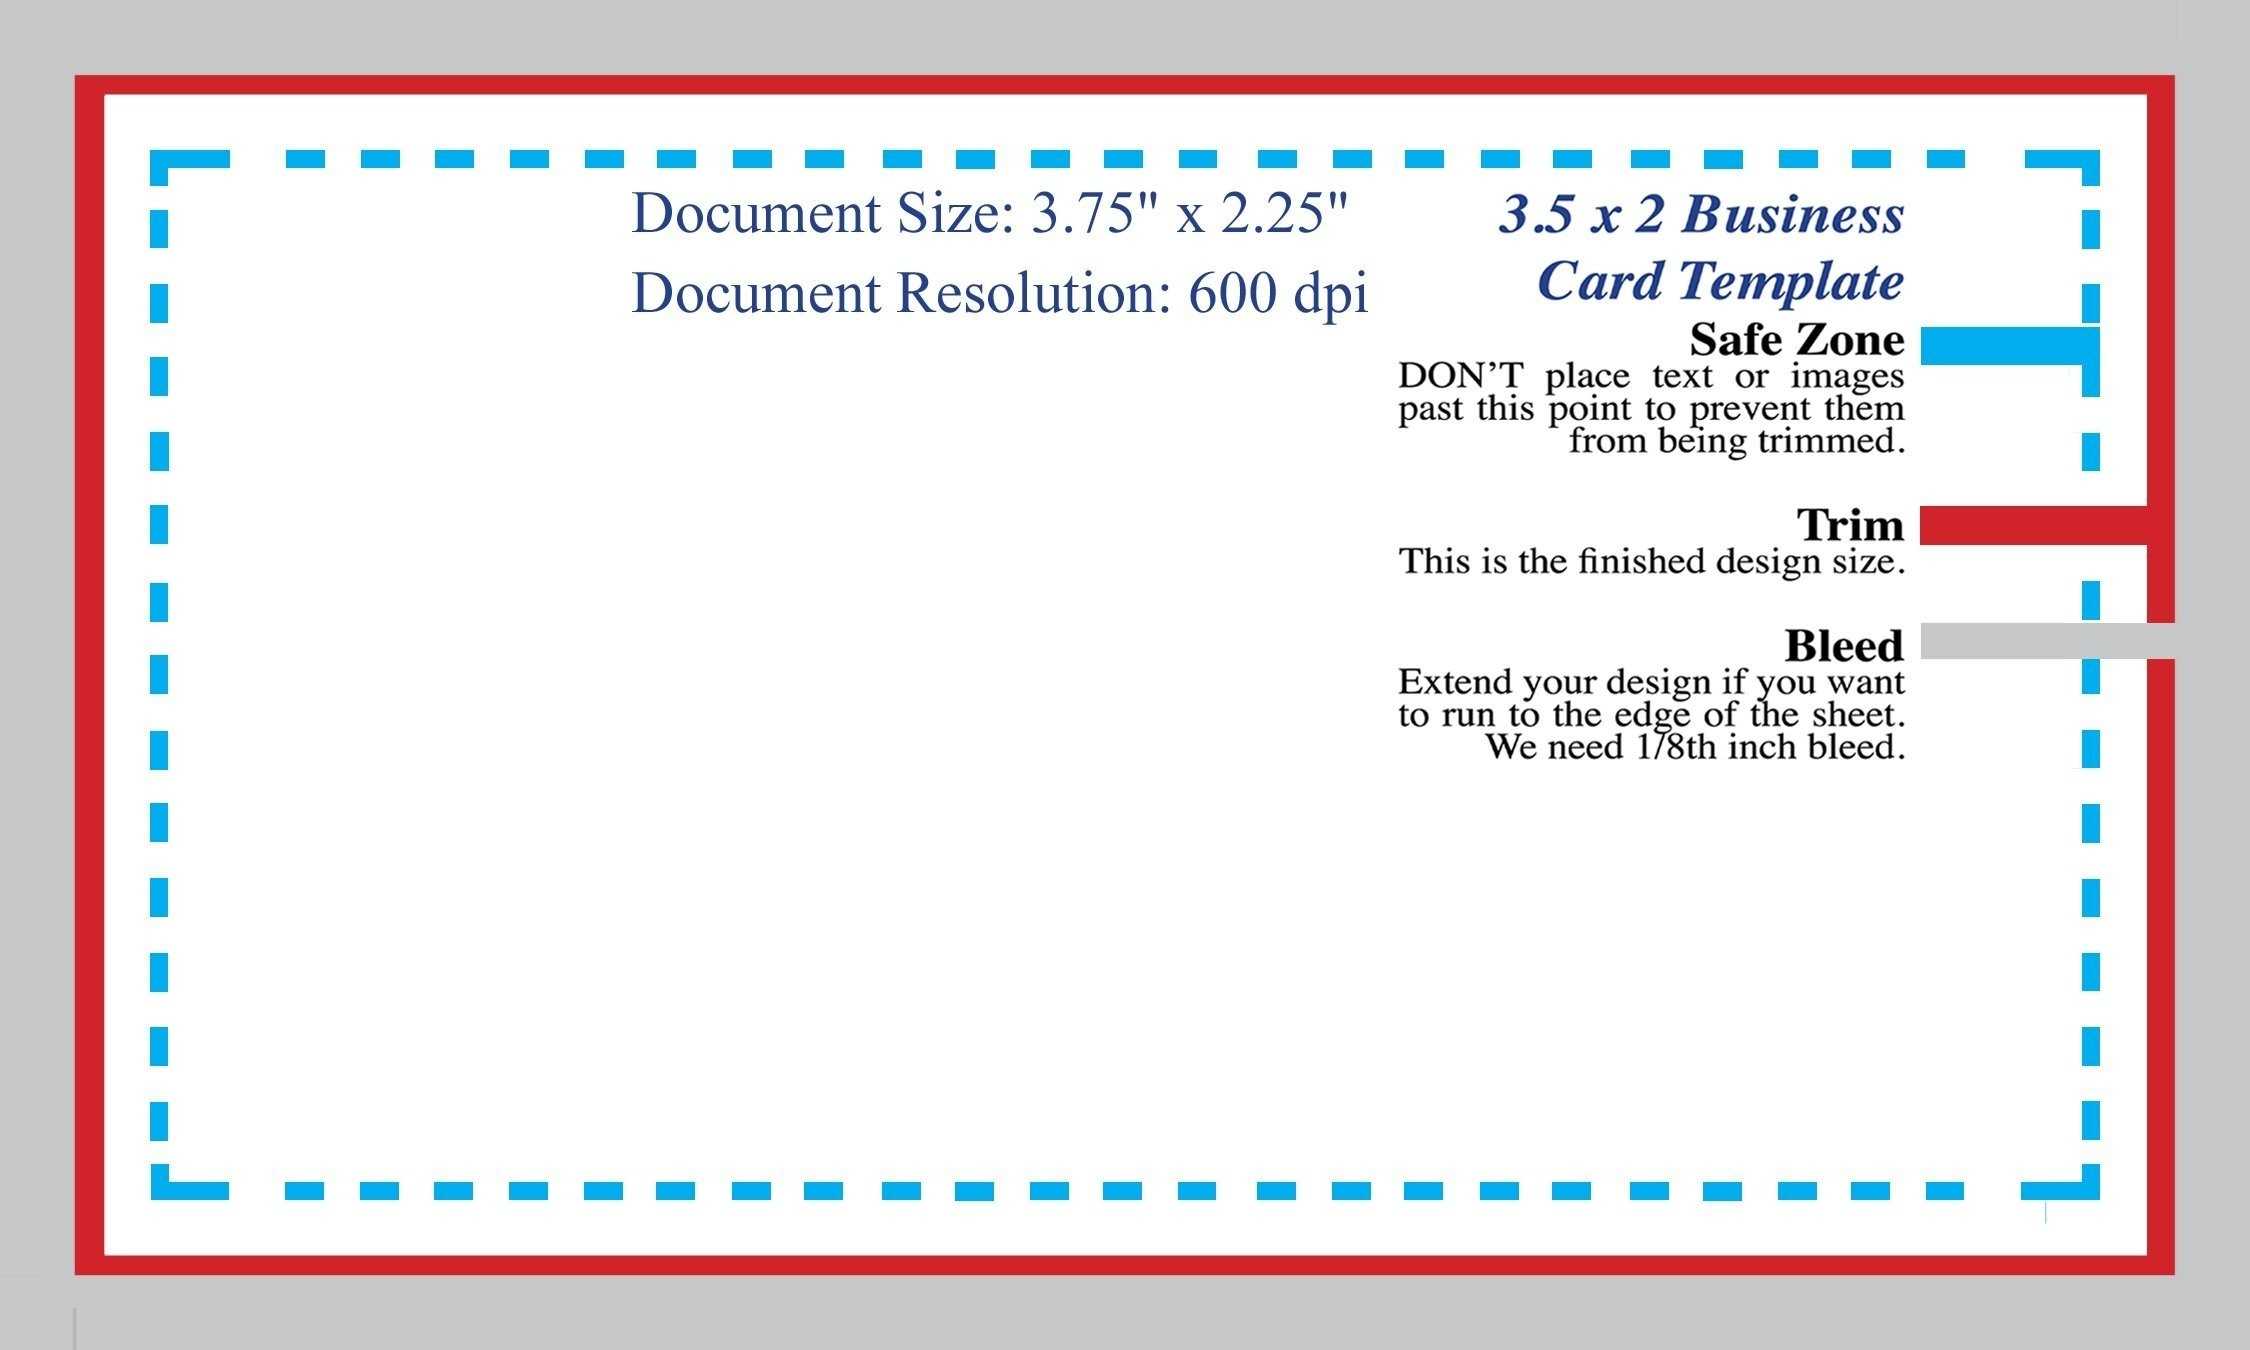 Business Card Template In Photoshop Throughout Business Card Template Size Photoshop